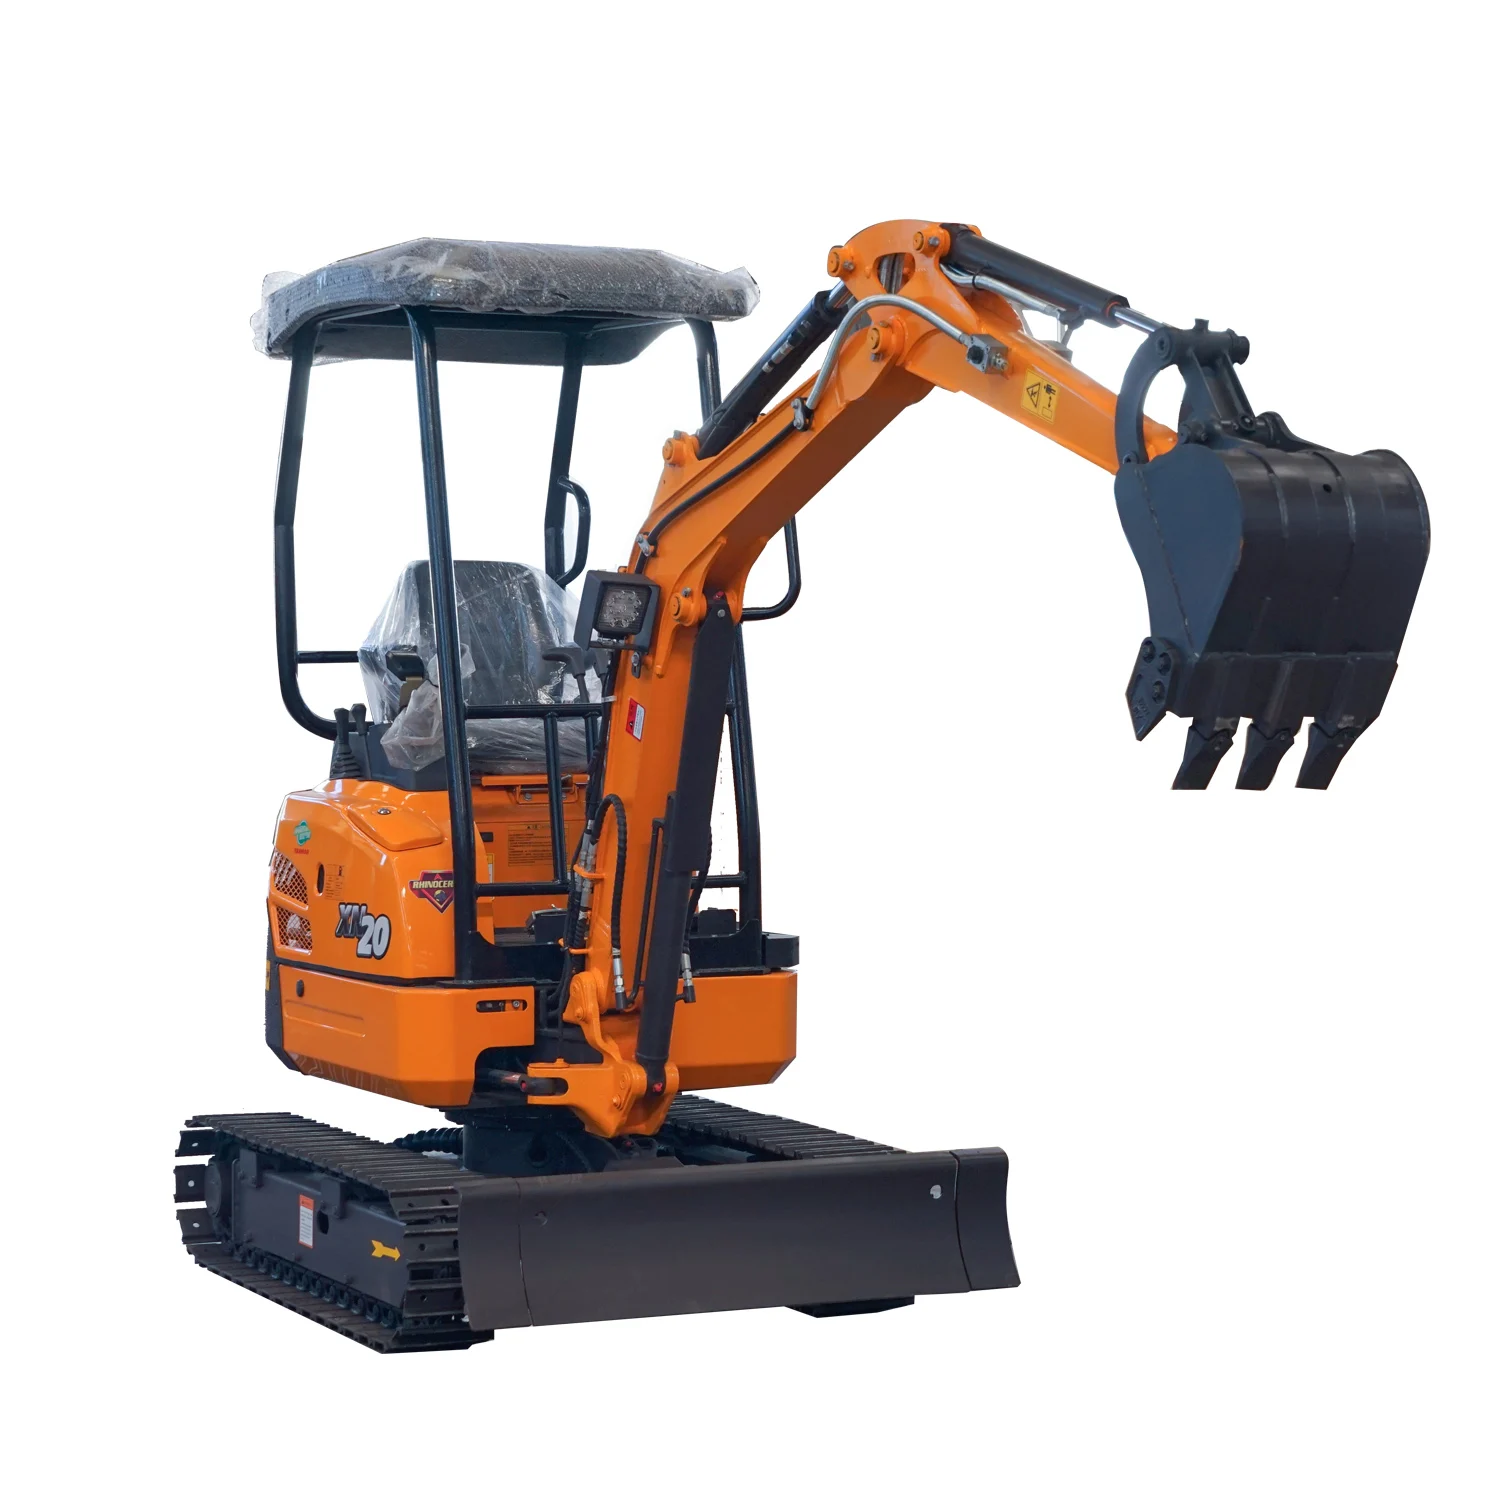 
xn20 small excavators with yanmar engine and fully imported hydraulic system are safe, reliable and fuel-efficient 